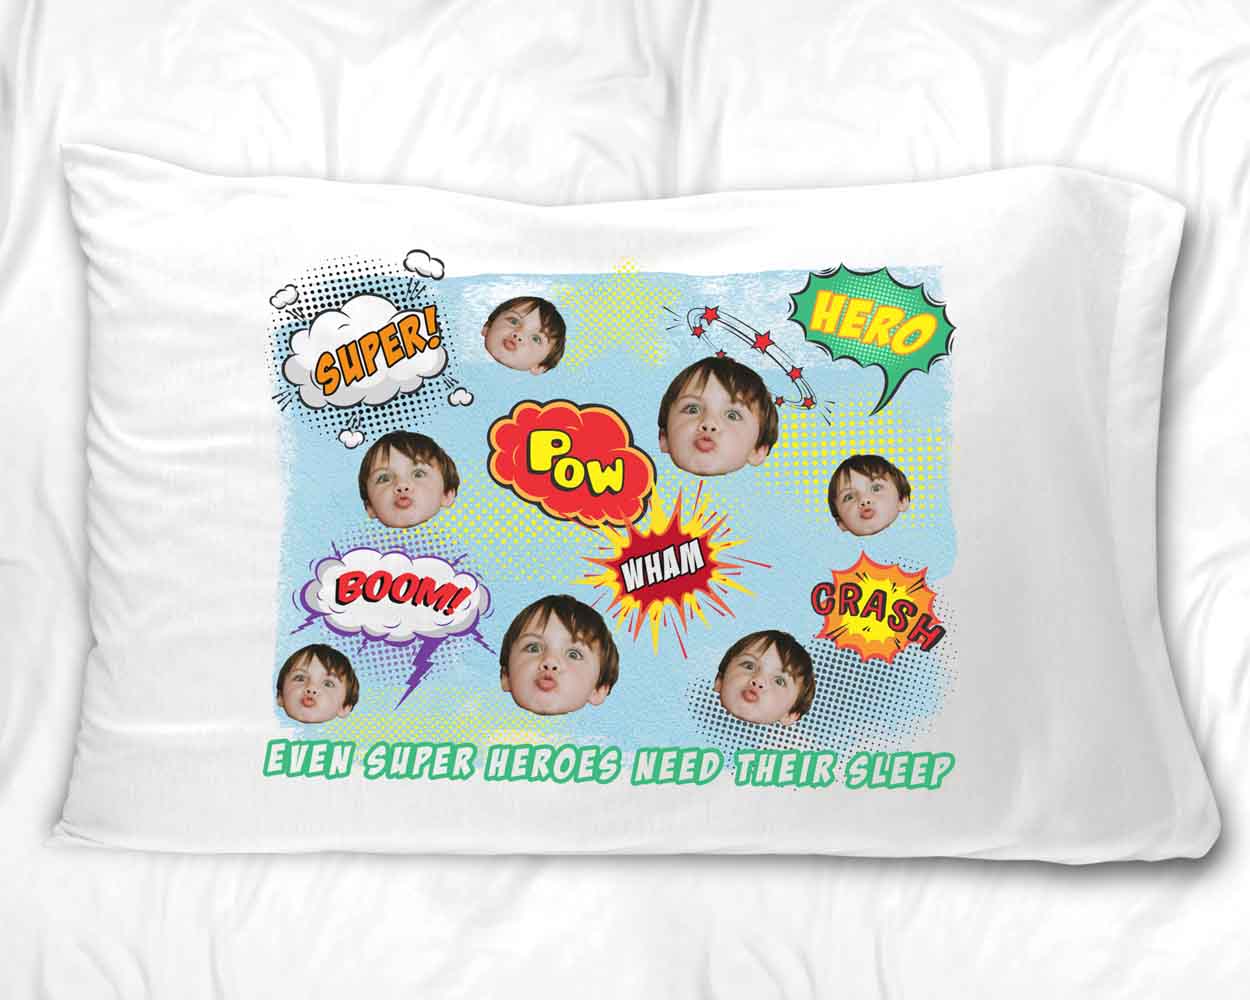 Custom printed superhero pillowcase design with your photo face cropped into the image and printed all over makes a unique gift for someone special.